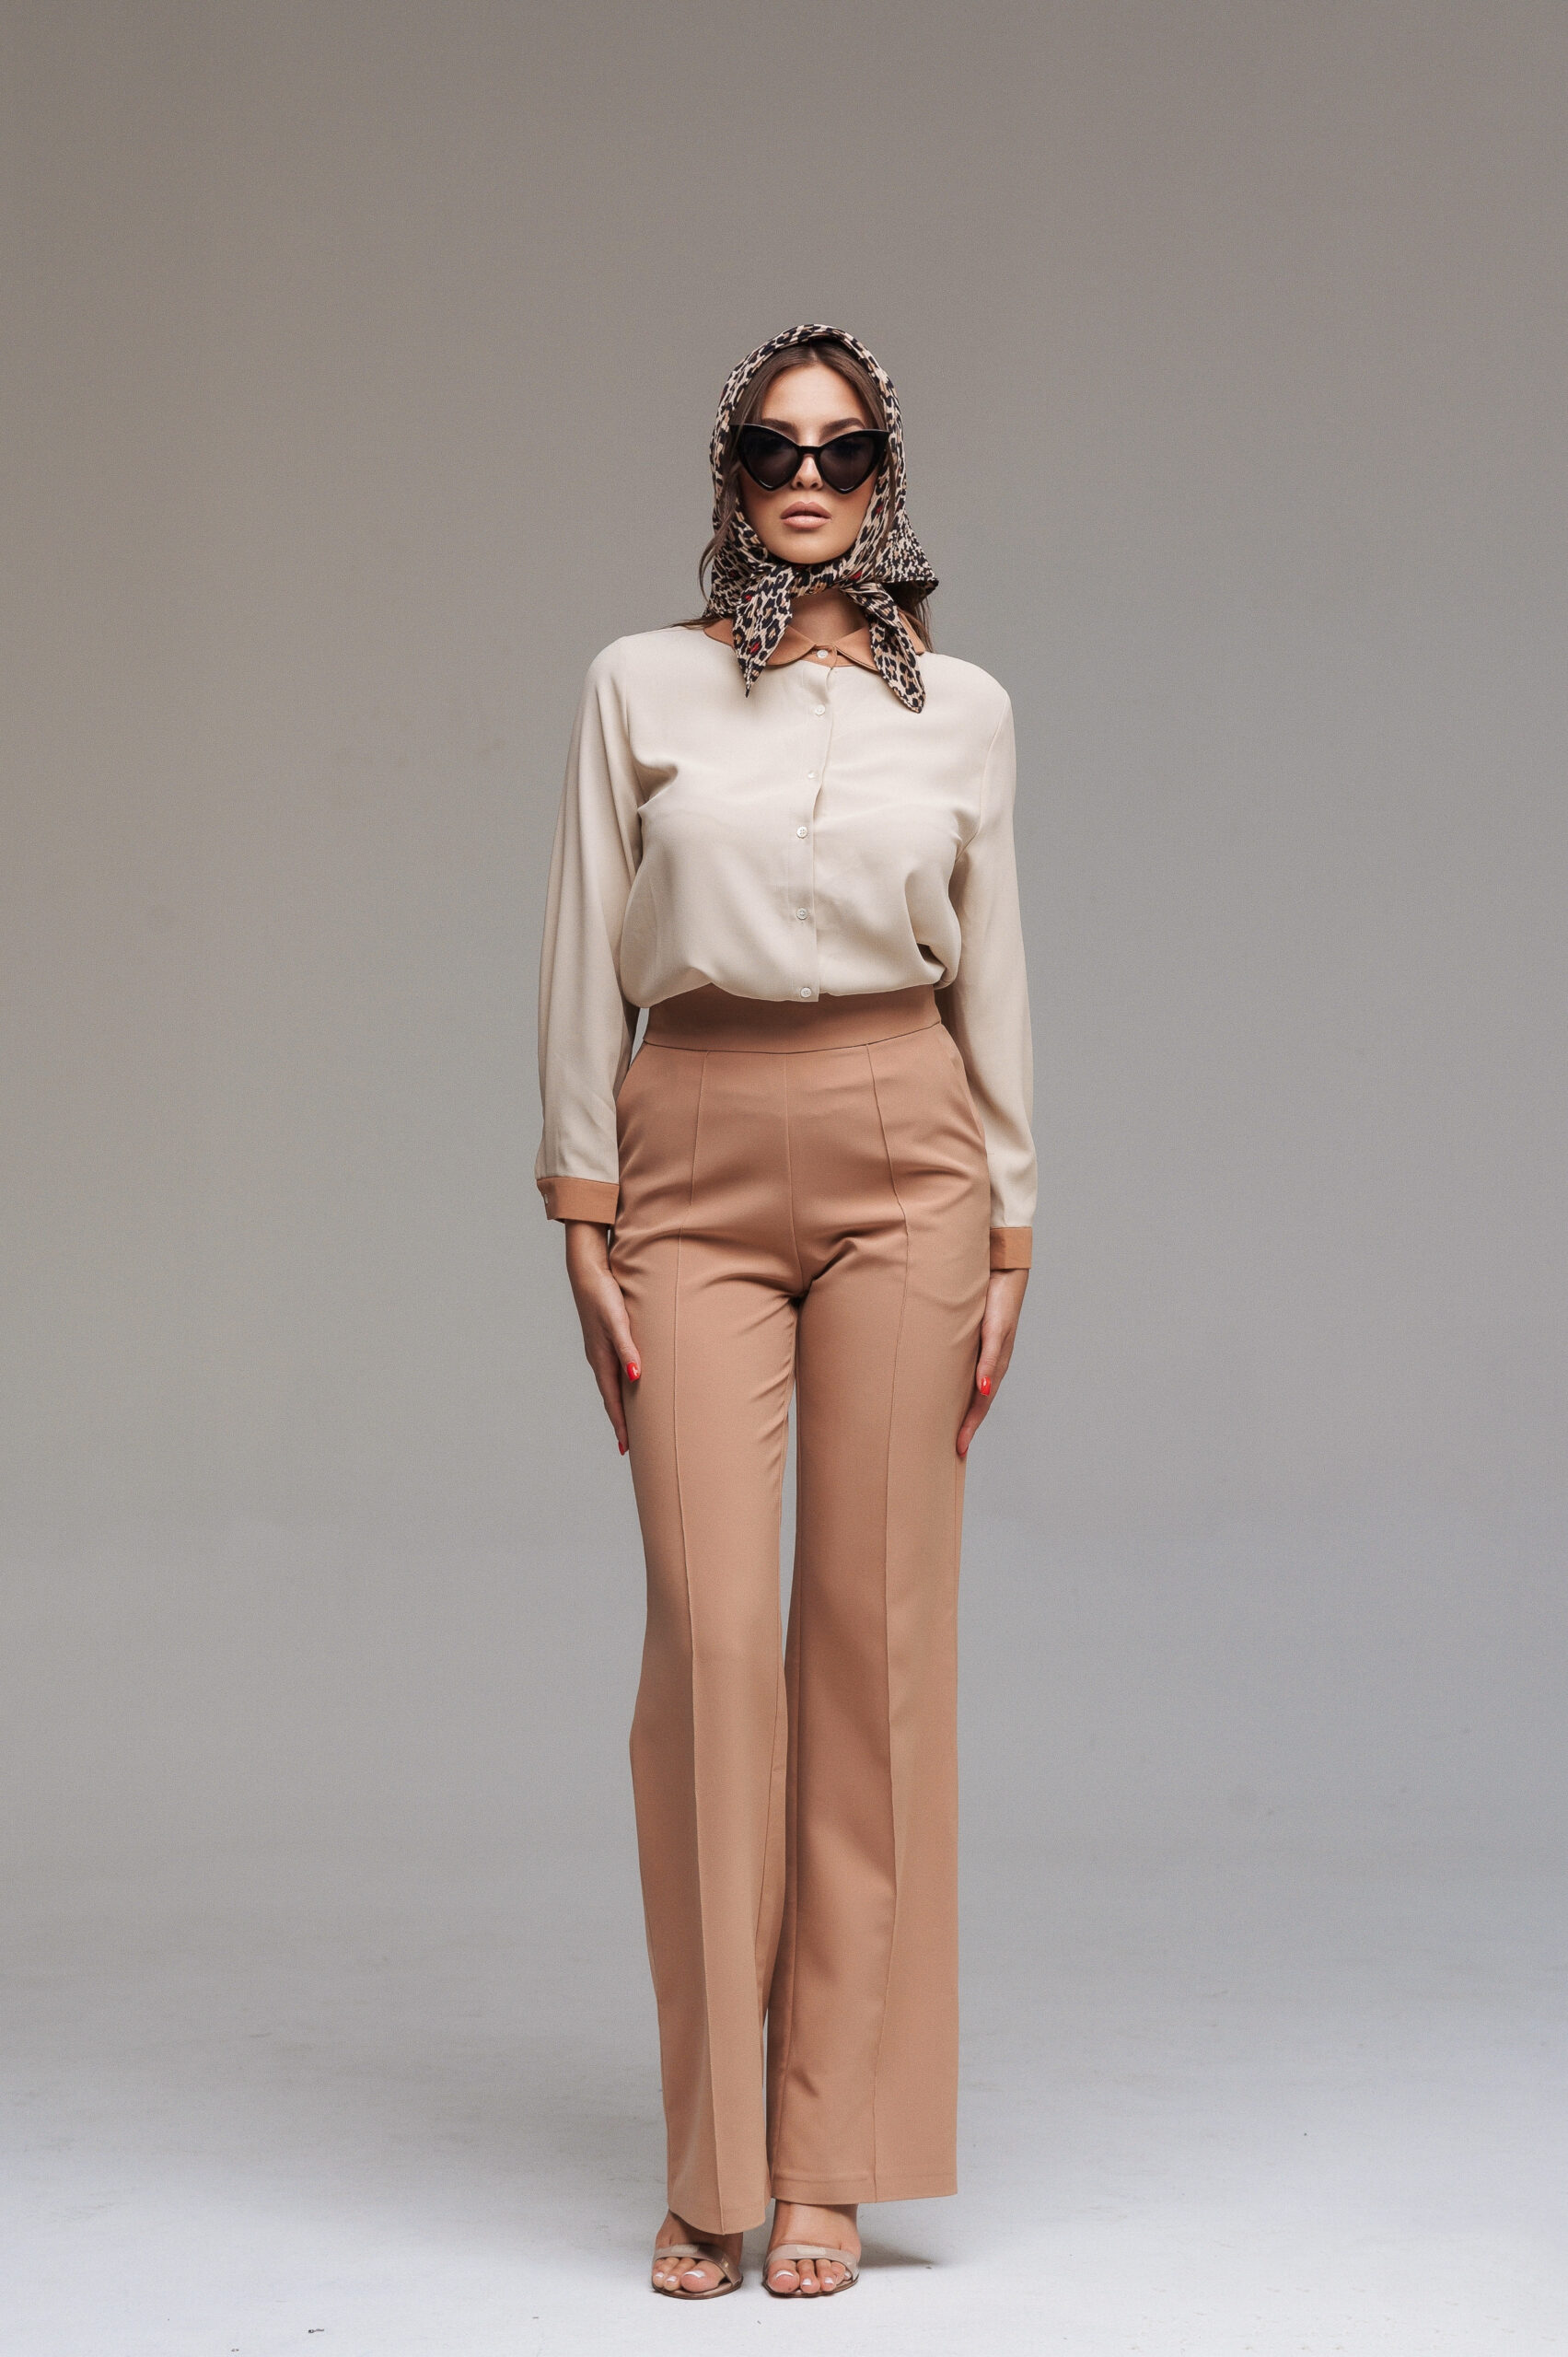 Blouse with an oval collar and narrow cuffs in the same color